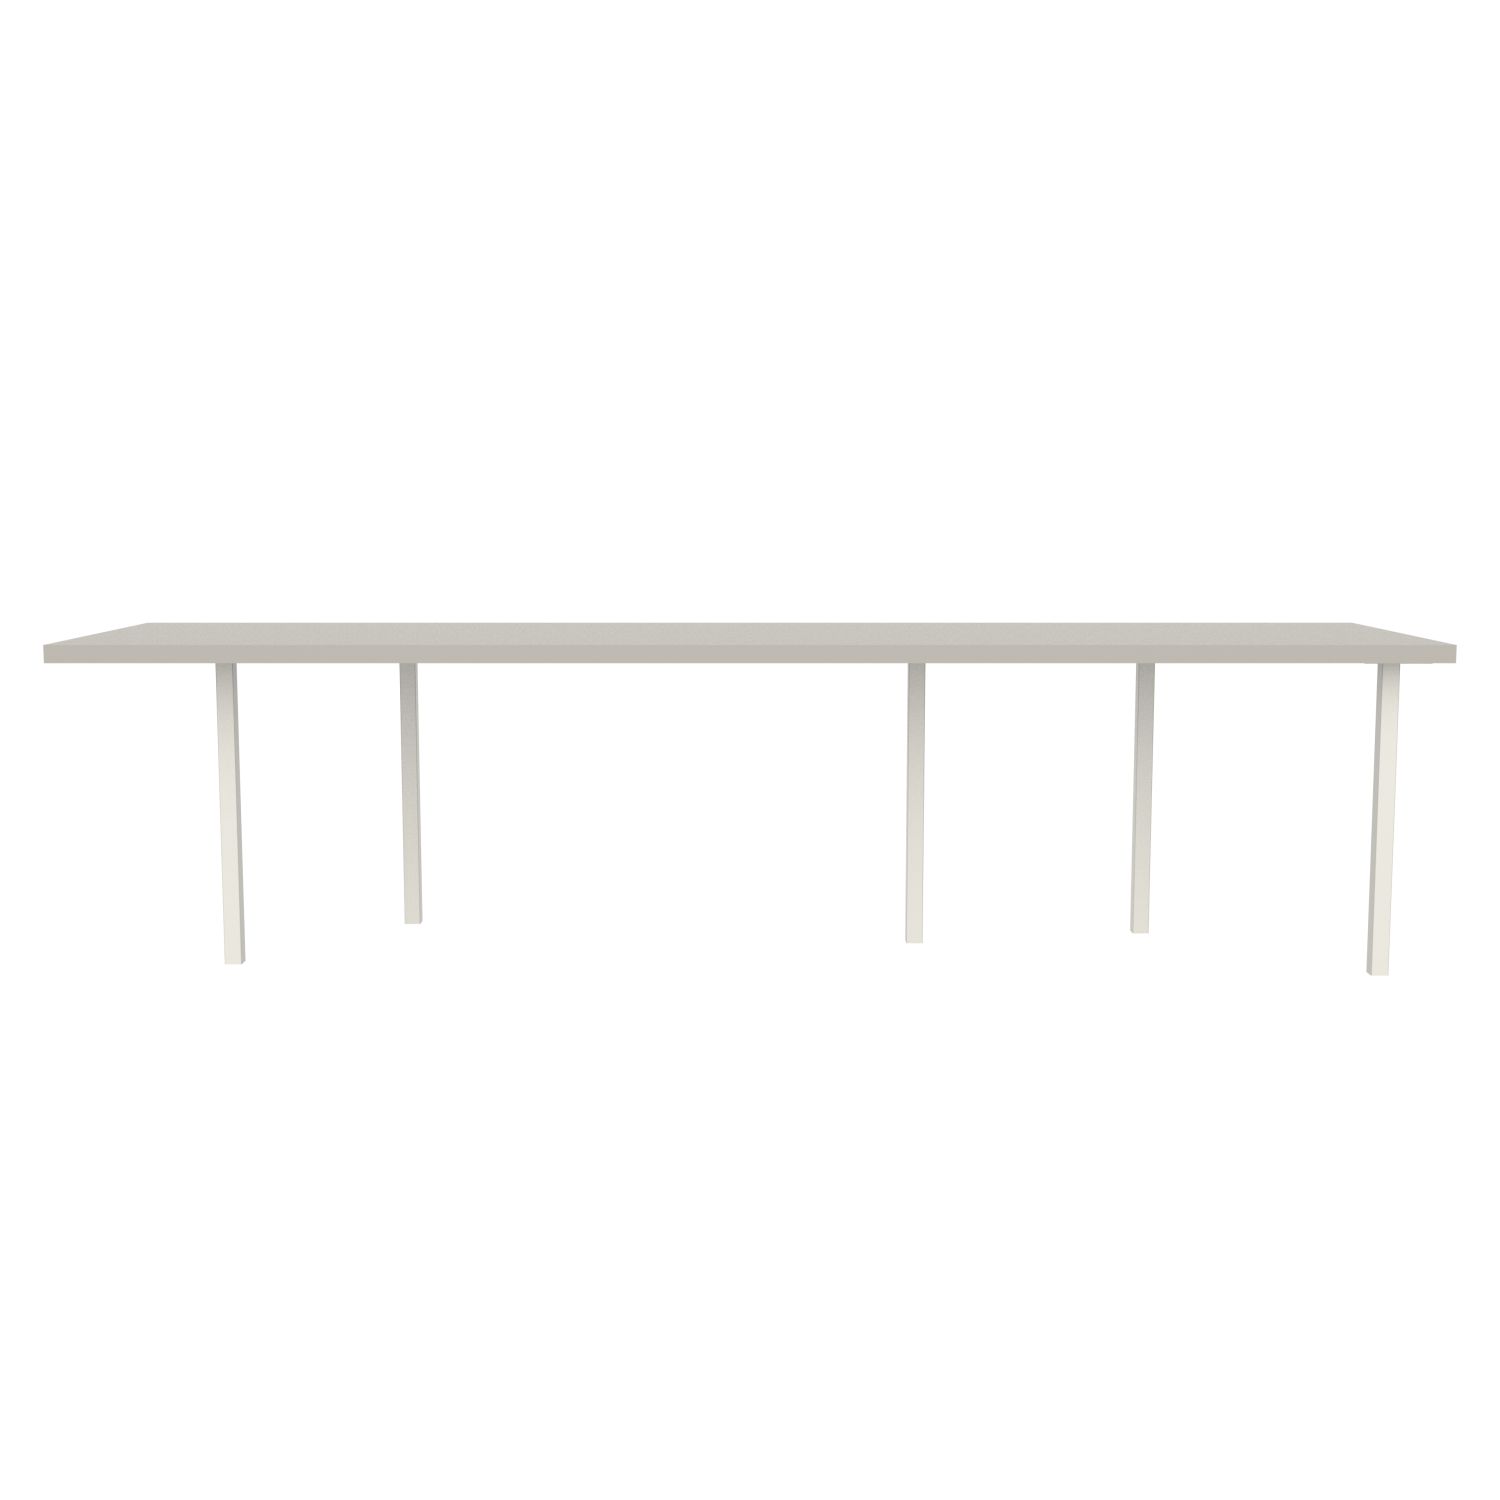 lensvelt bbrand table five fixed heigt 80x310 hpl white 50 mm price level 1 white ral9010